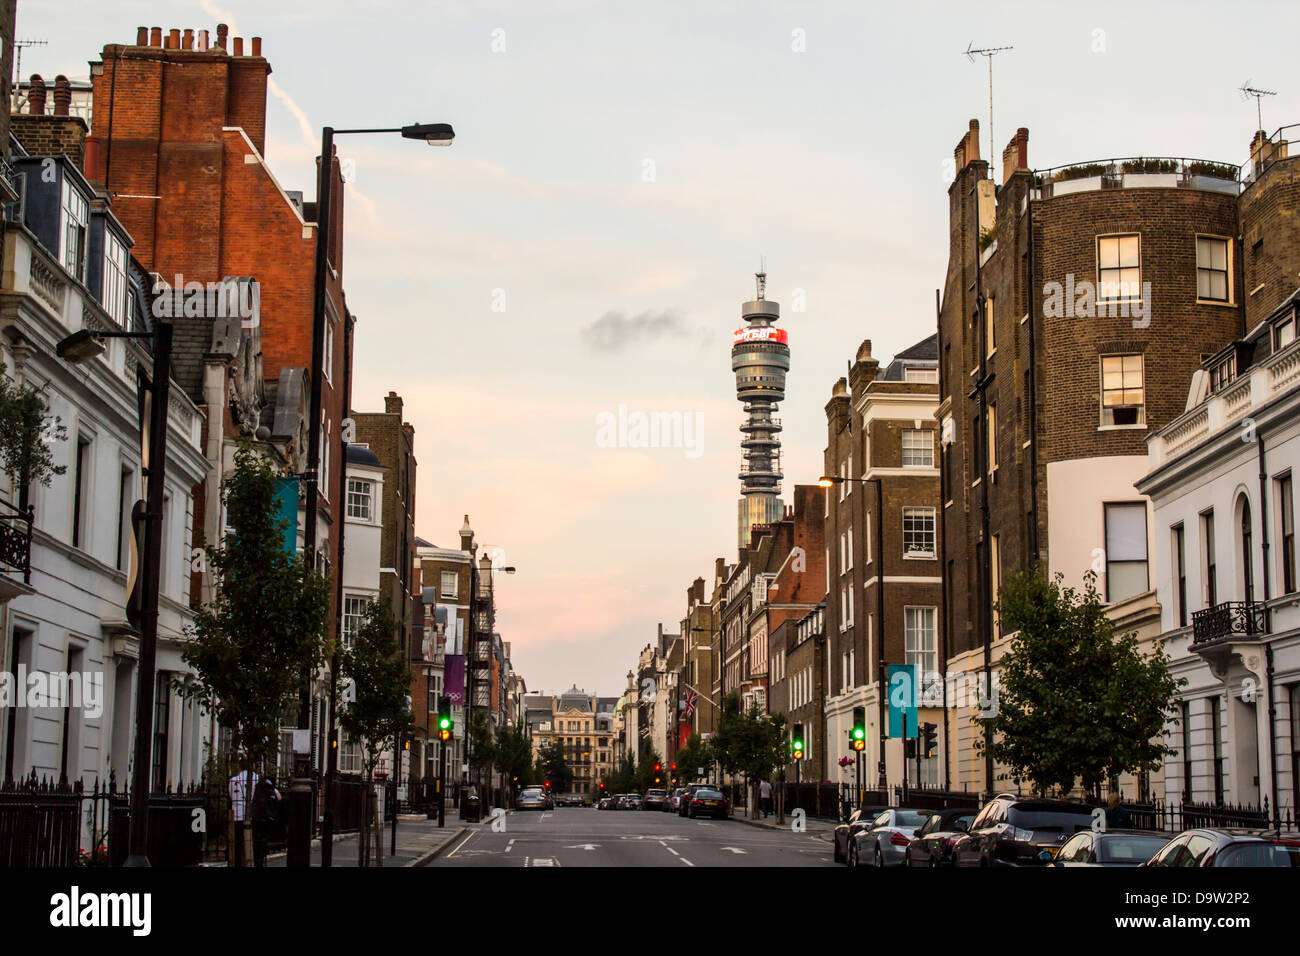 Weymouth Street, Marylebone, London, England with View of the BT Tower Stock Photo